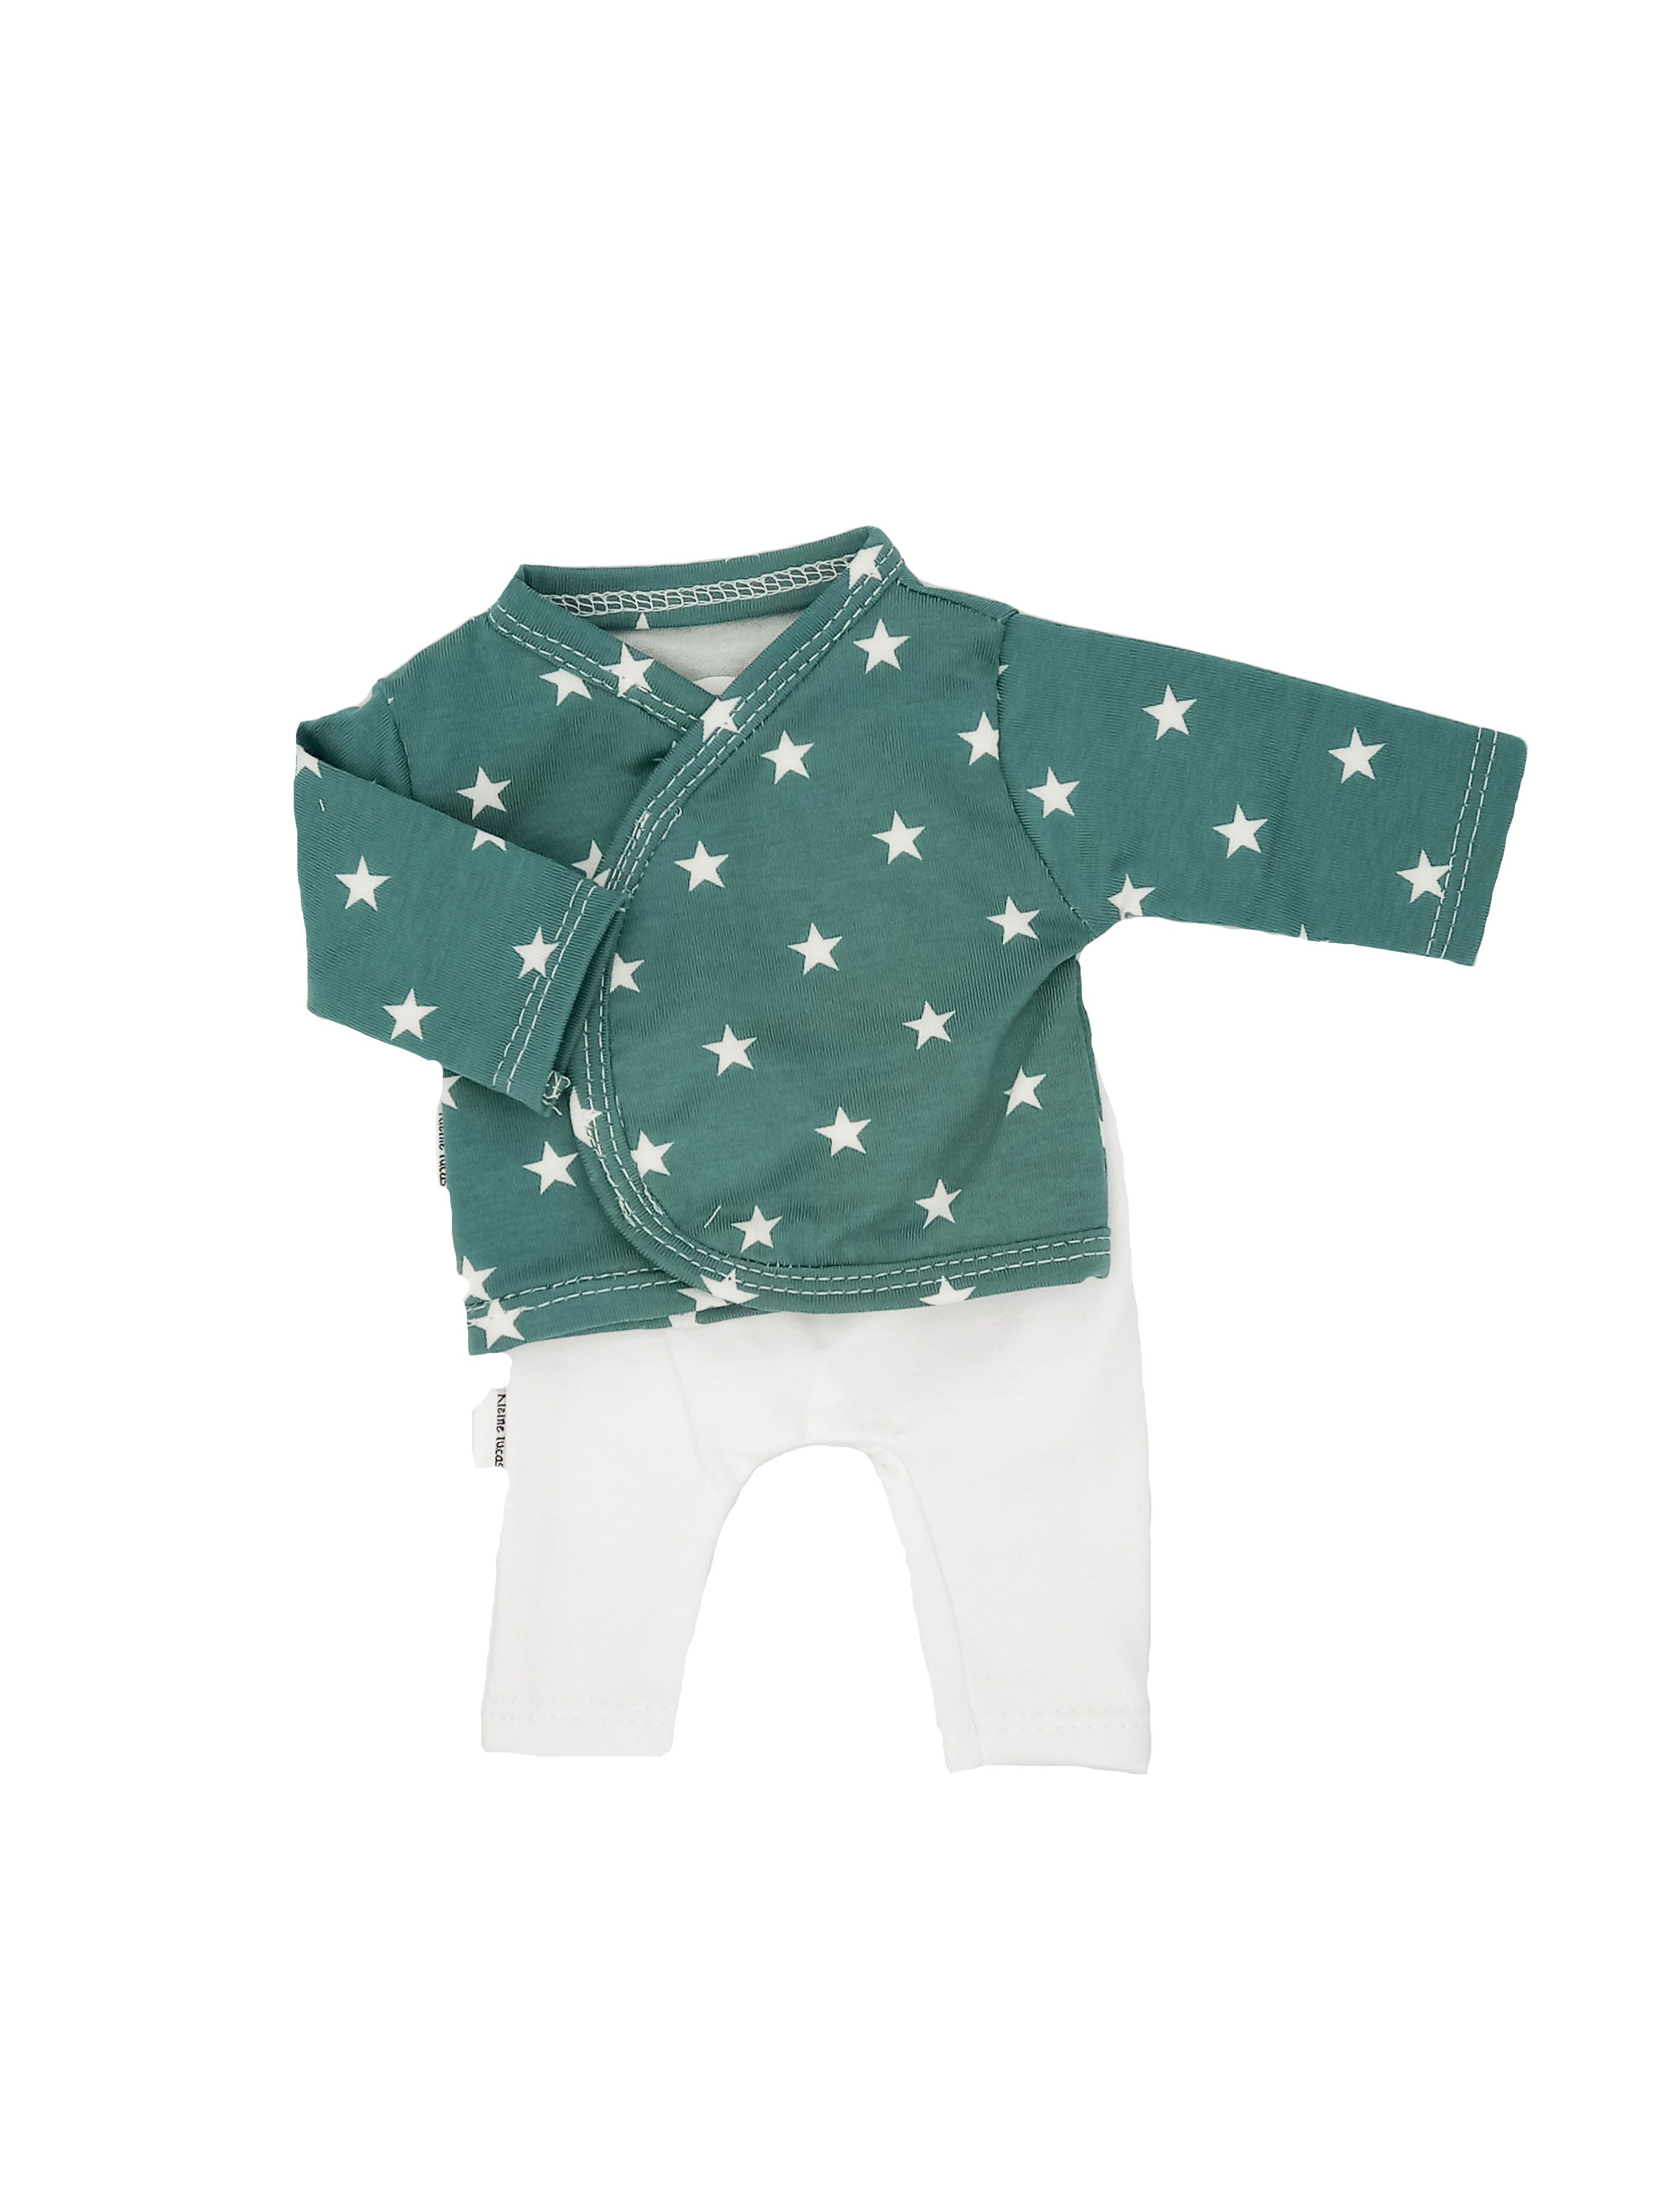 Preemie Baby Clothes, Top & Trouser Set, Green and White Stars - Set - Little Lucas